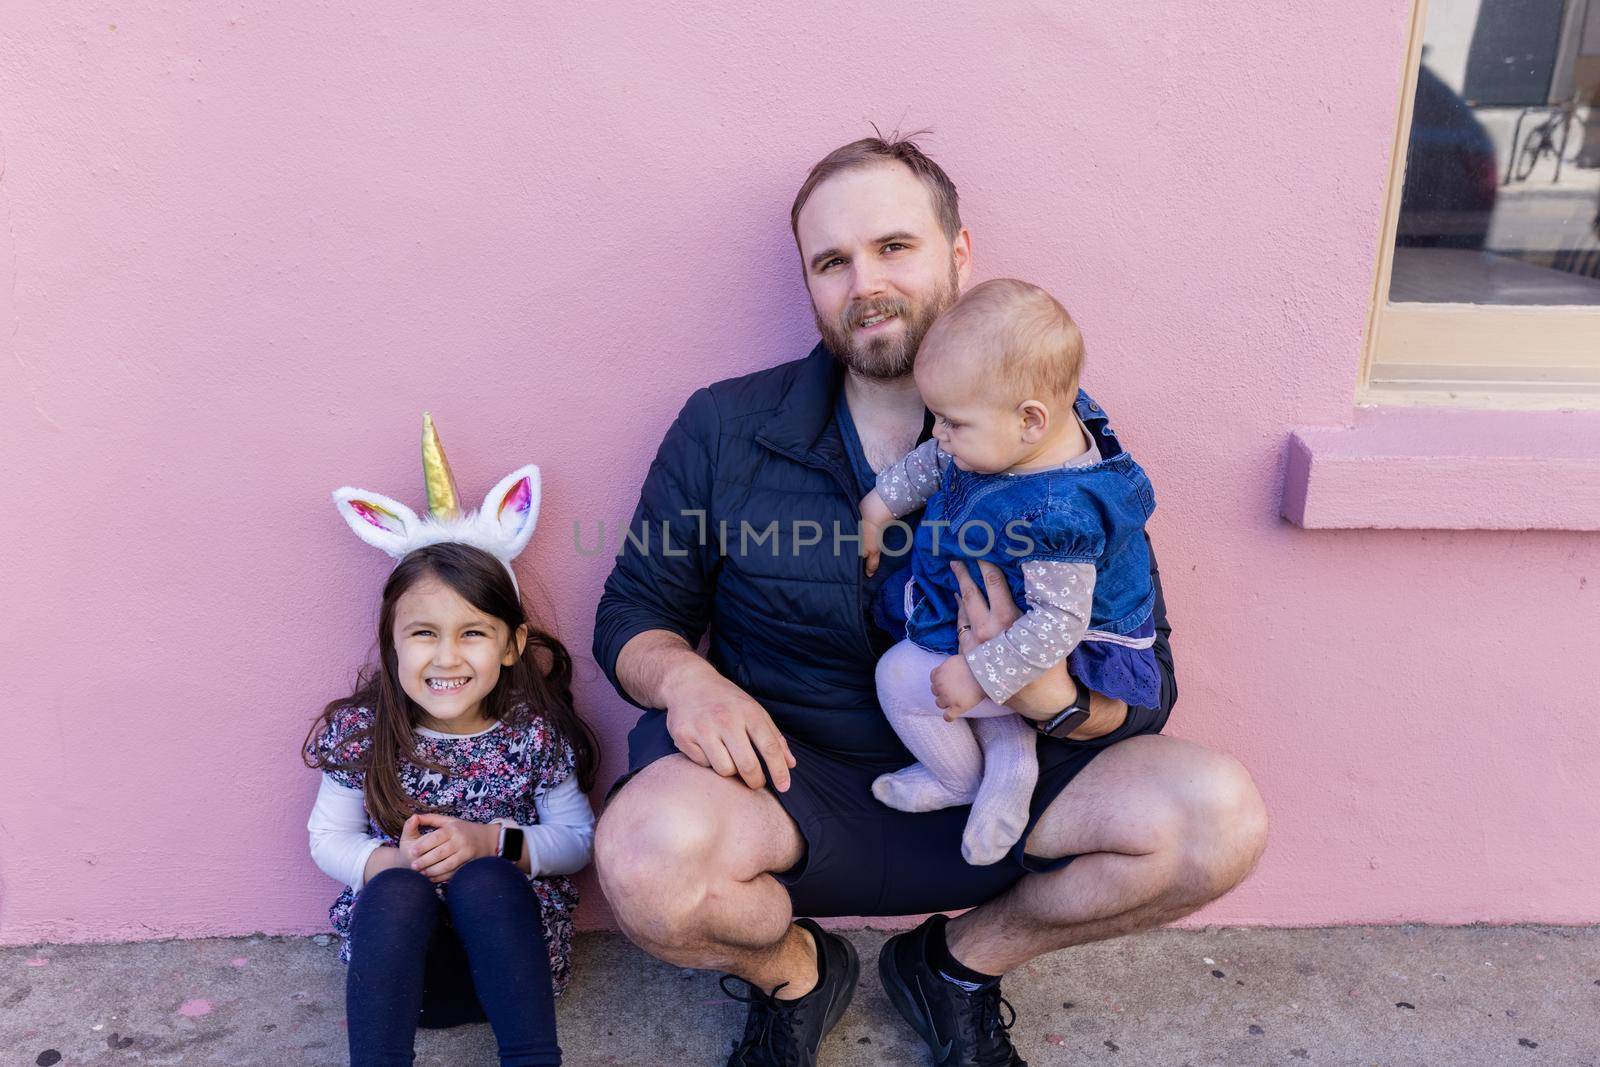 Portrait of young father with his adorable baby and older daughter in front of a pink wall. Cute child wearing unicorn headband next to baby and bearded man with pink background. Happy family outdoors